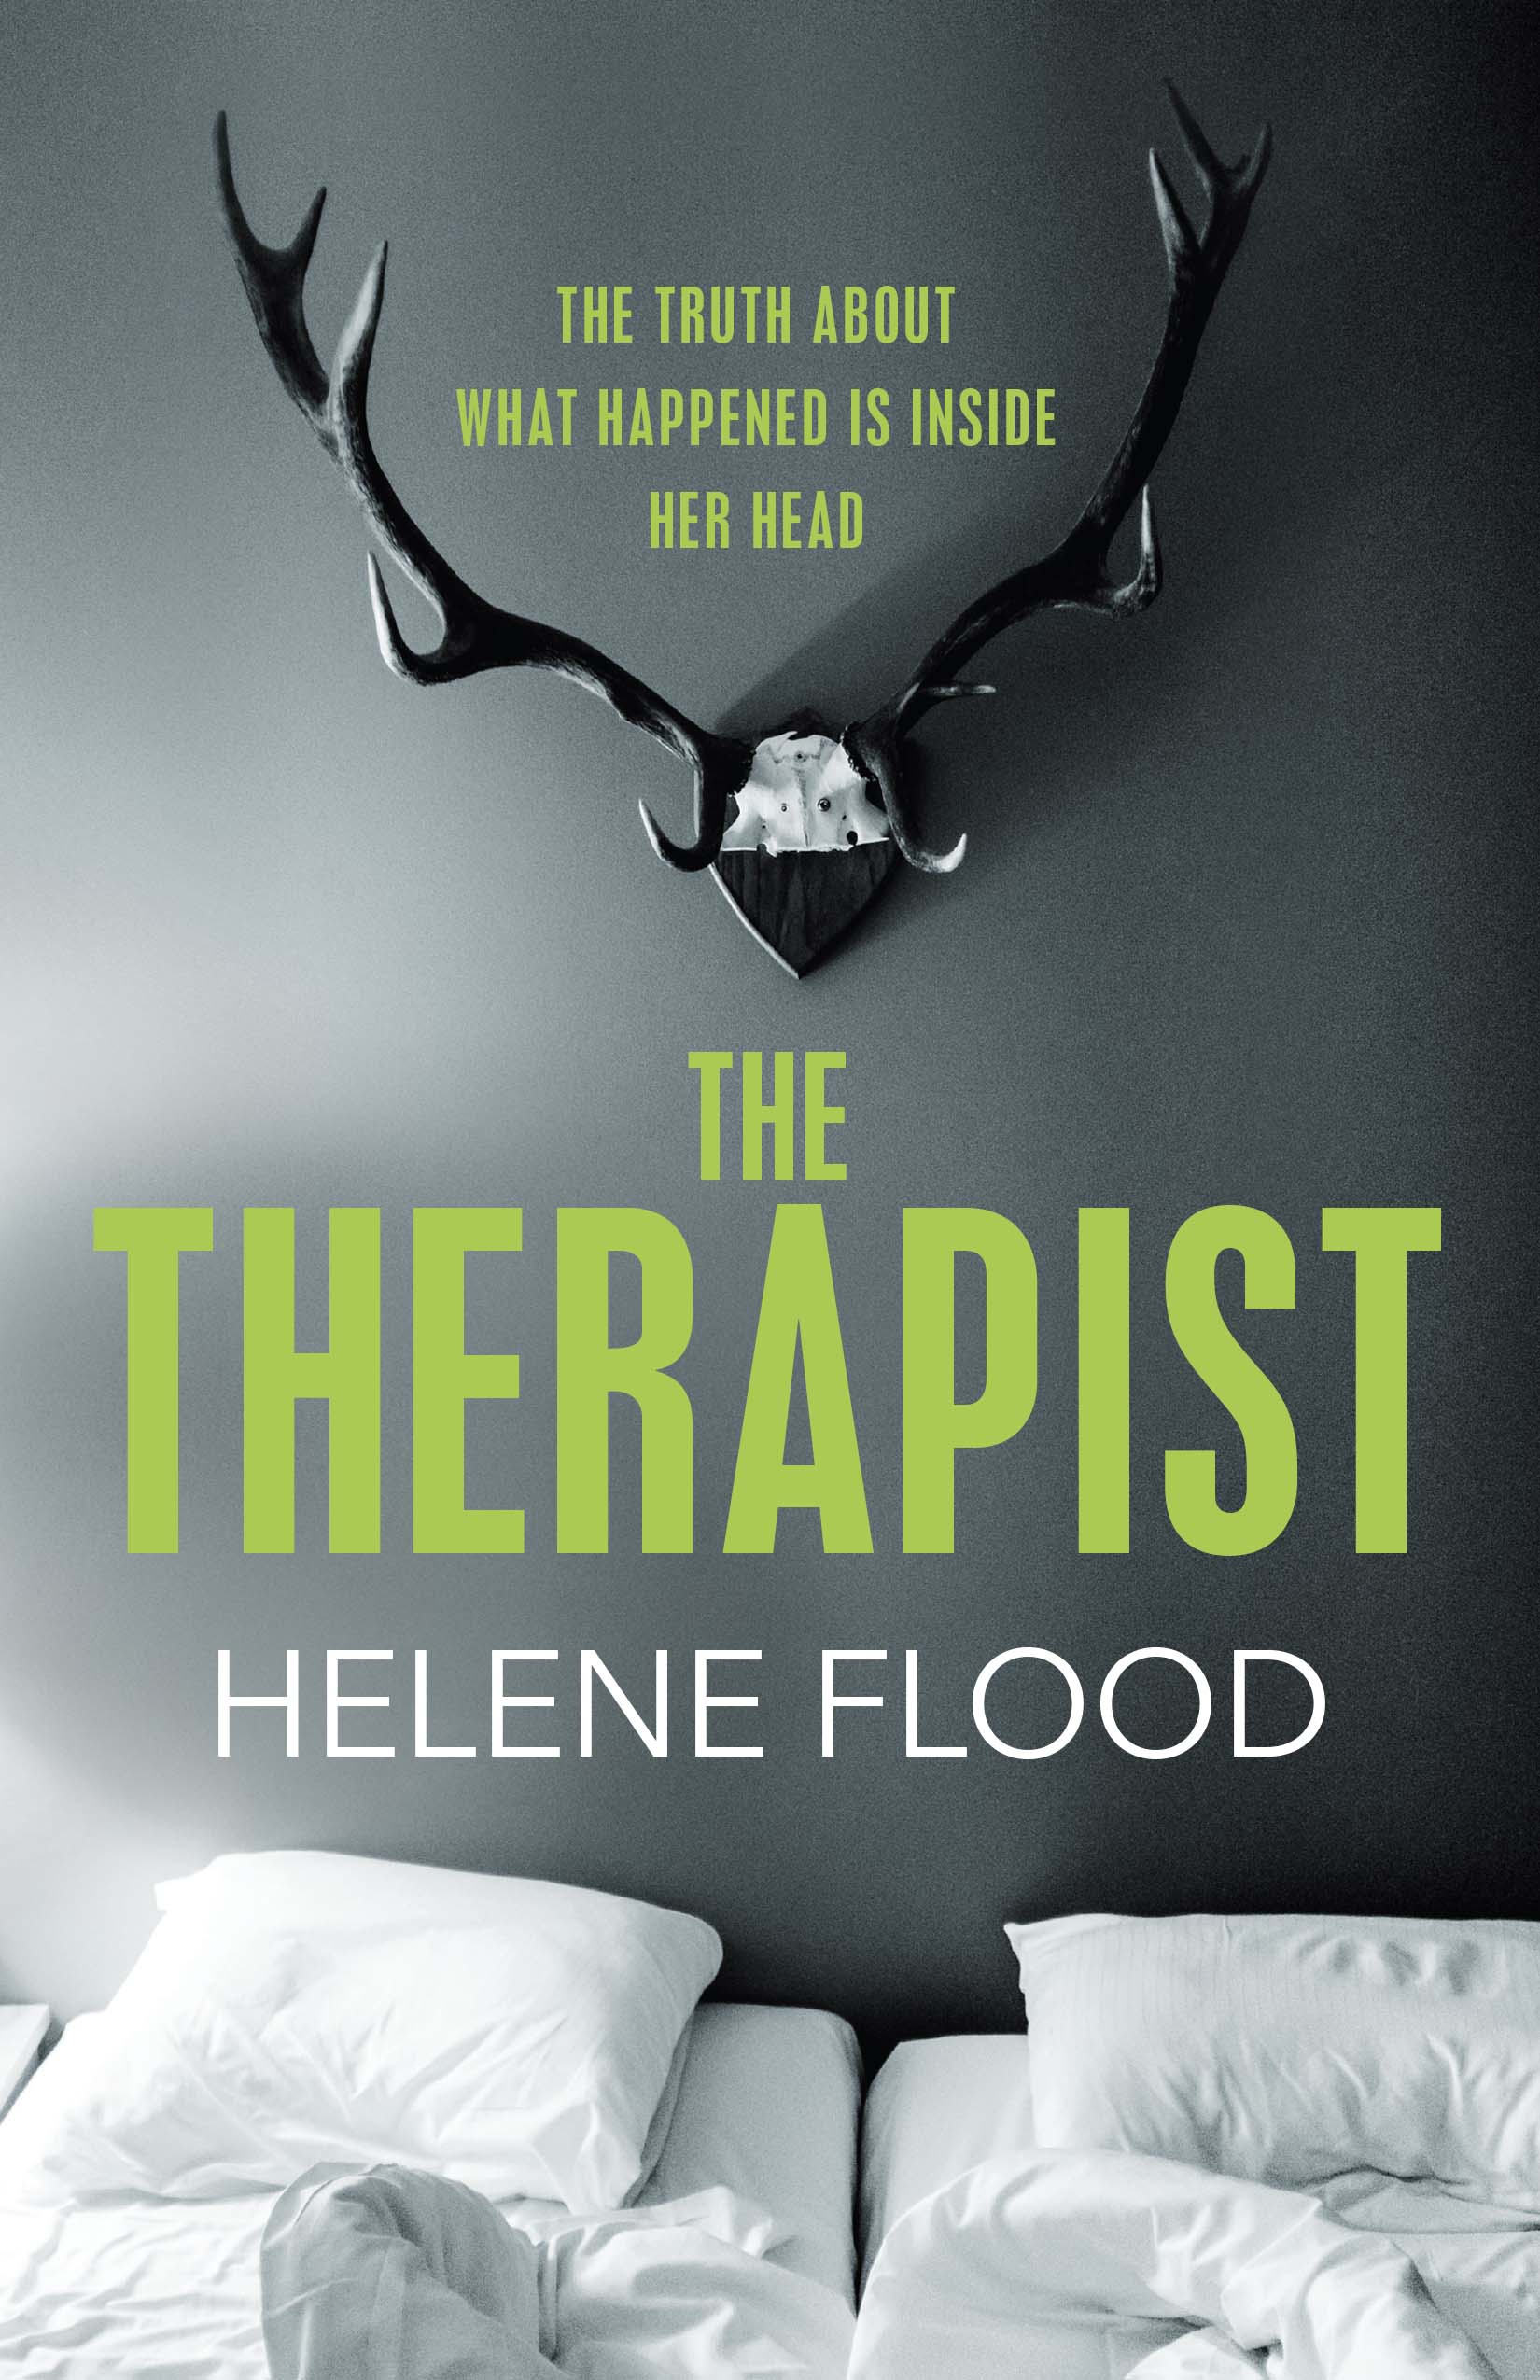 Helene Flood's The Therapist book cover